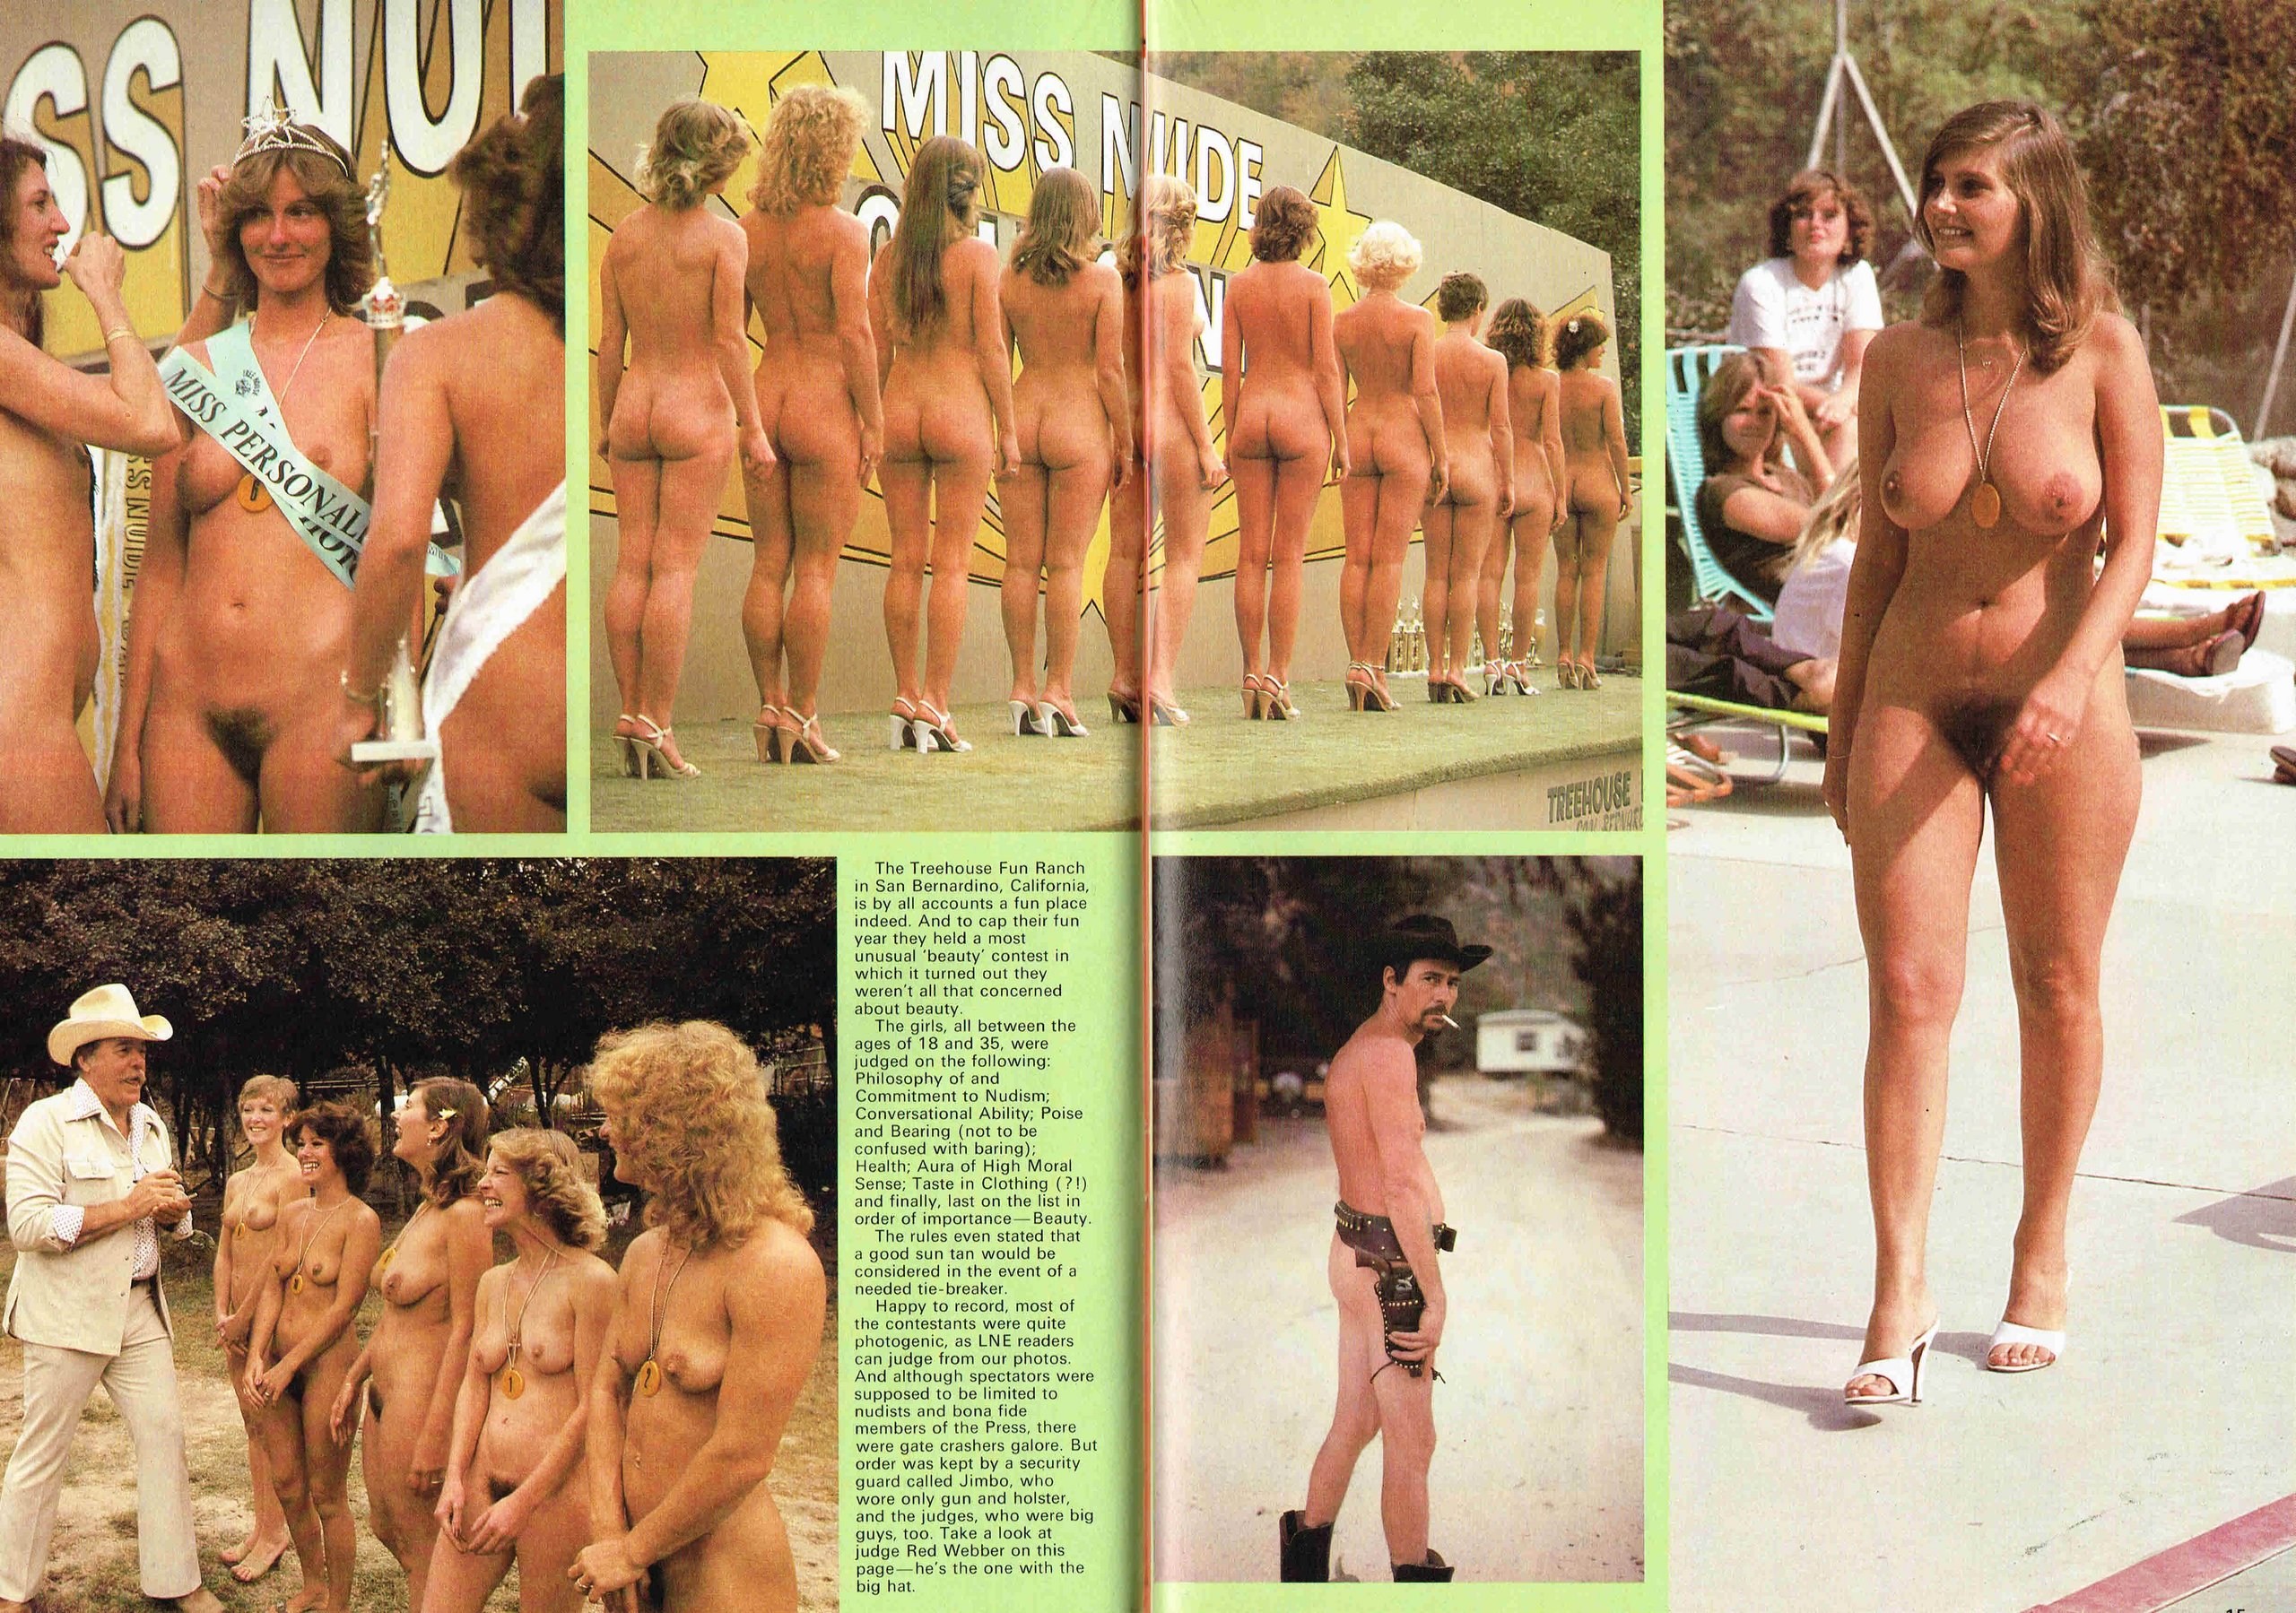 Retro Nude Beauty - Retro nudists at a pageant (46 photos) - motherless porn pics